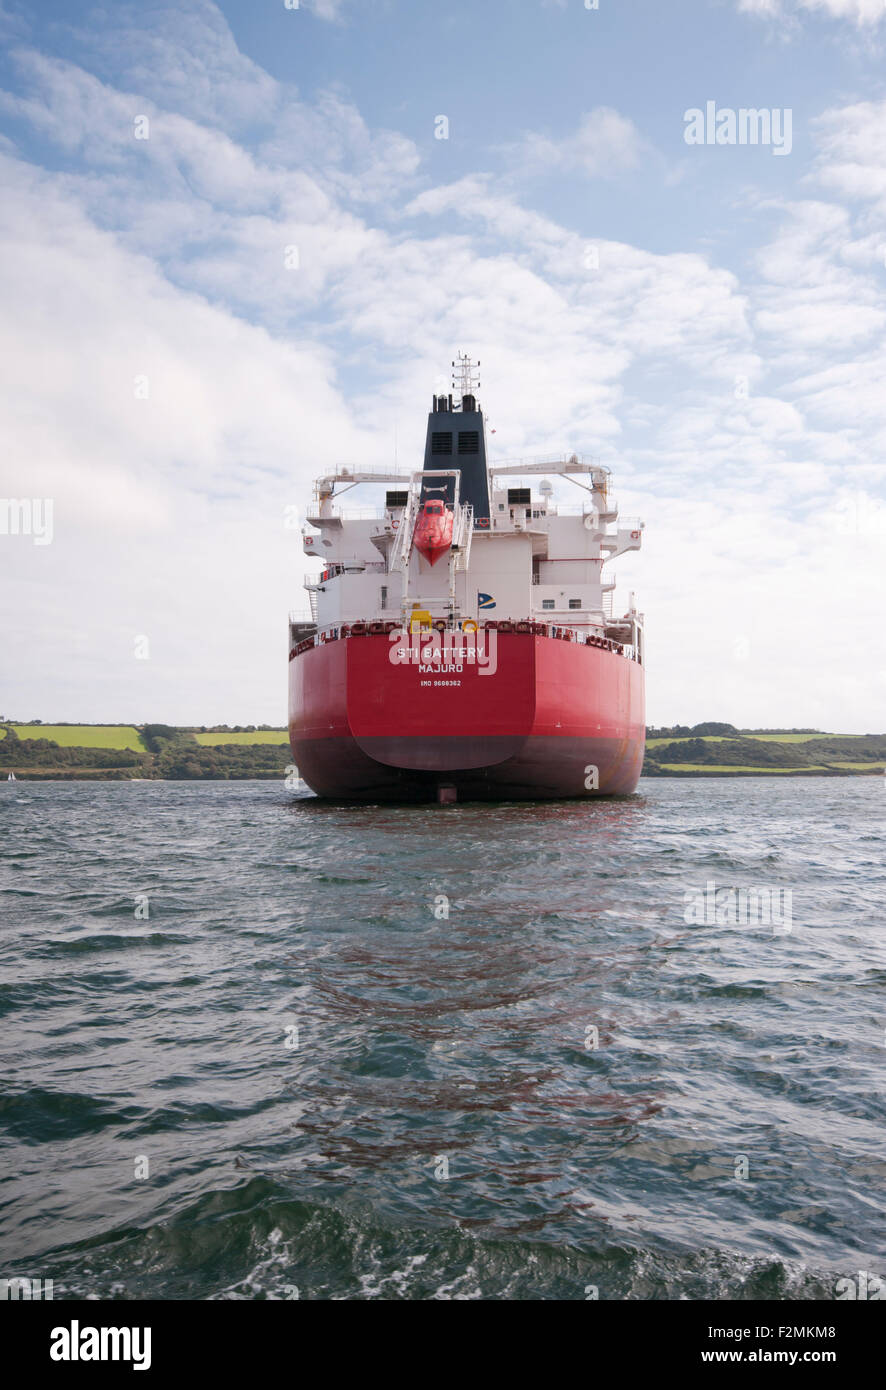 Stern View Of THe Oil / Chemical tanker Ship STI BATTERY Registerd in The Marshall Islands Moored On The River Fal Cornwall UK Stock Photo